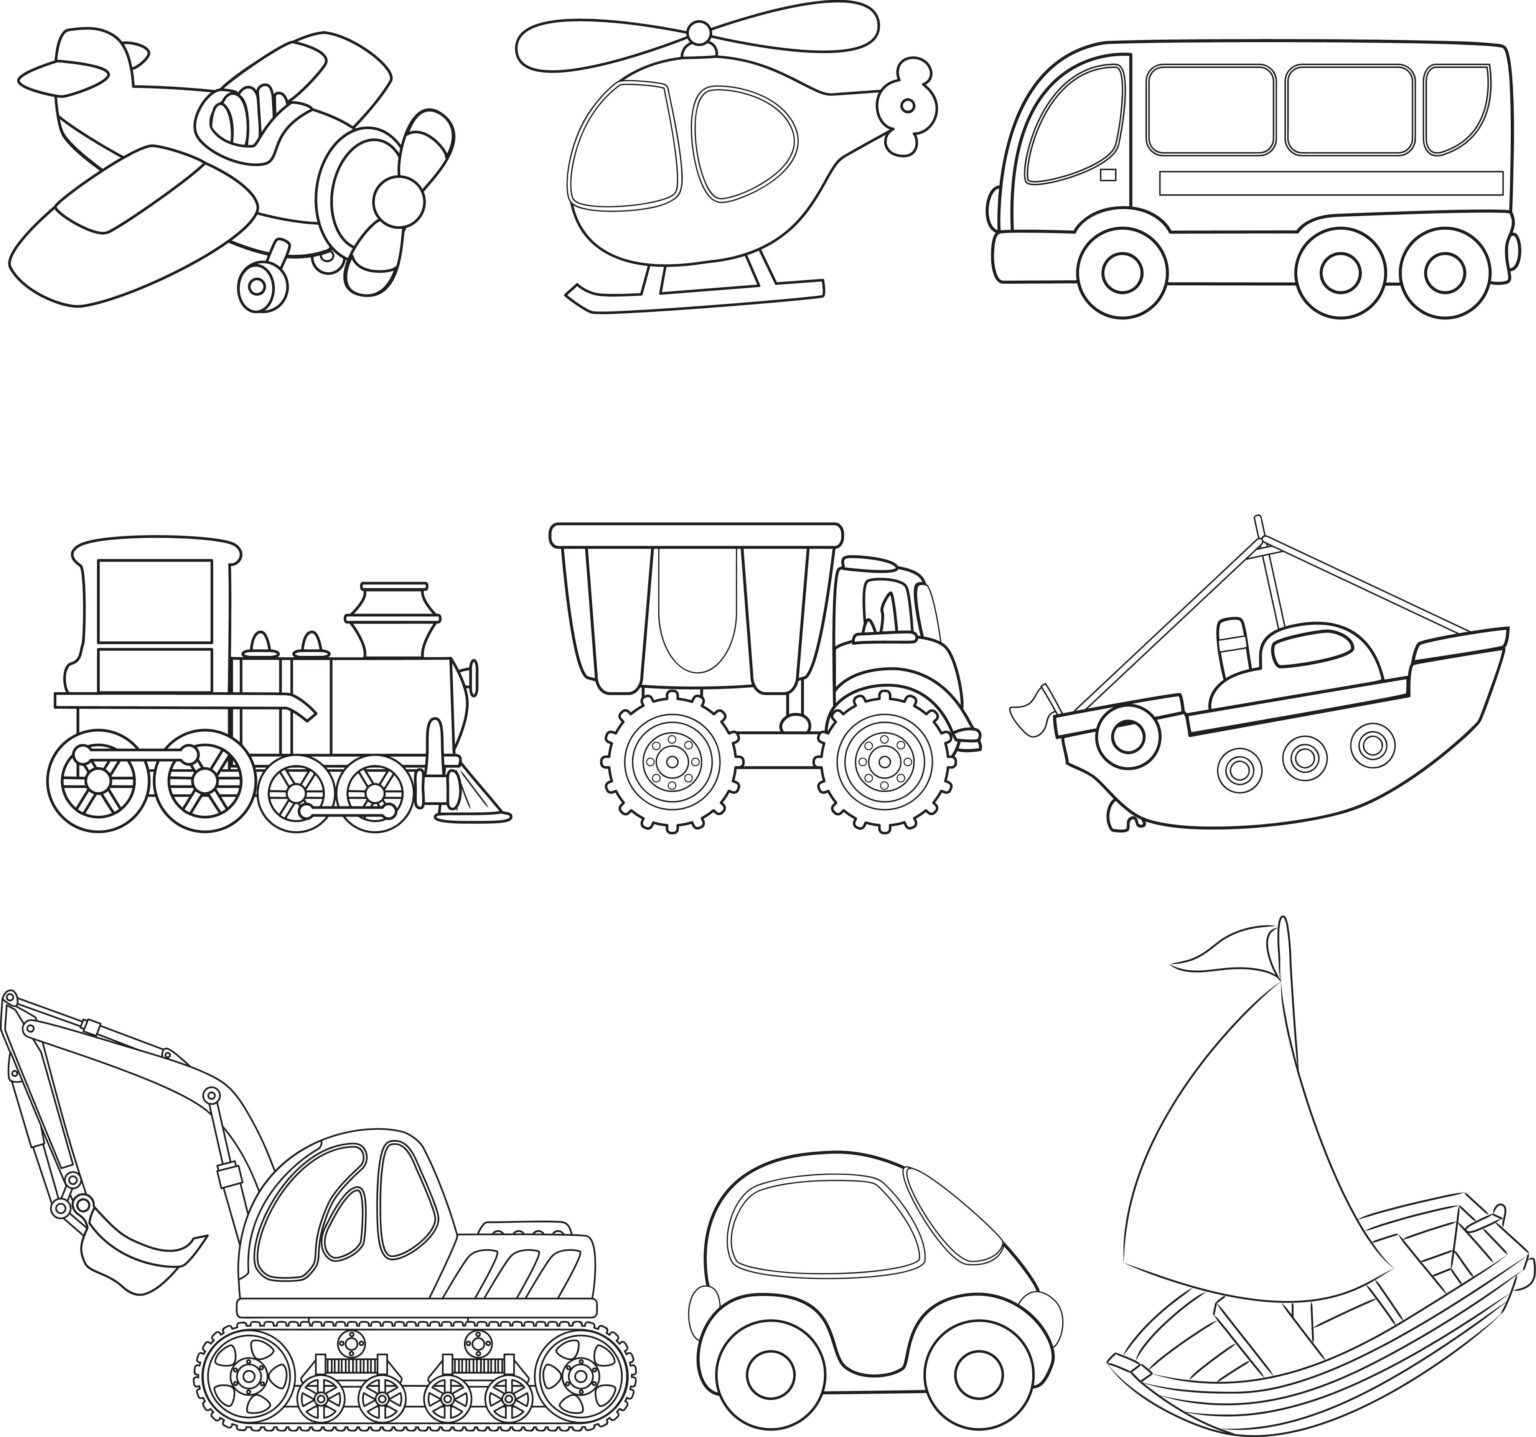 Lets Us Learn With These Transportation Coloring Pages PDF ...